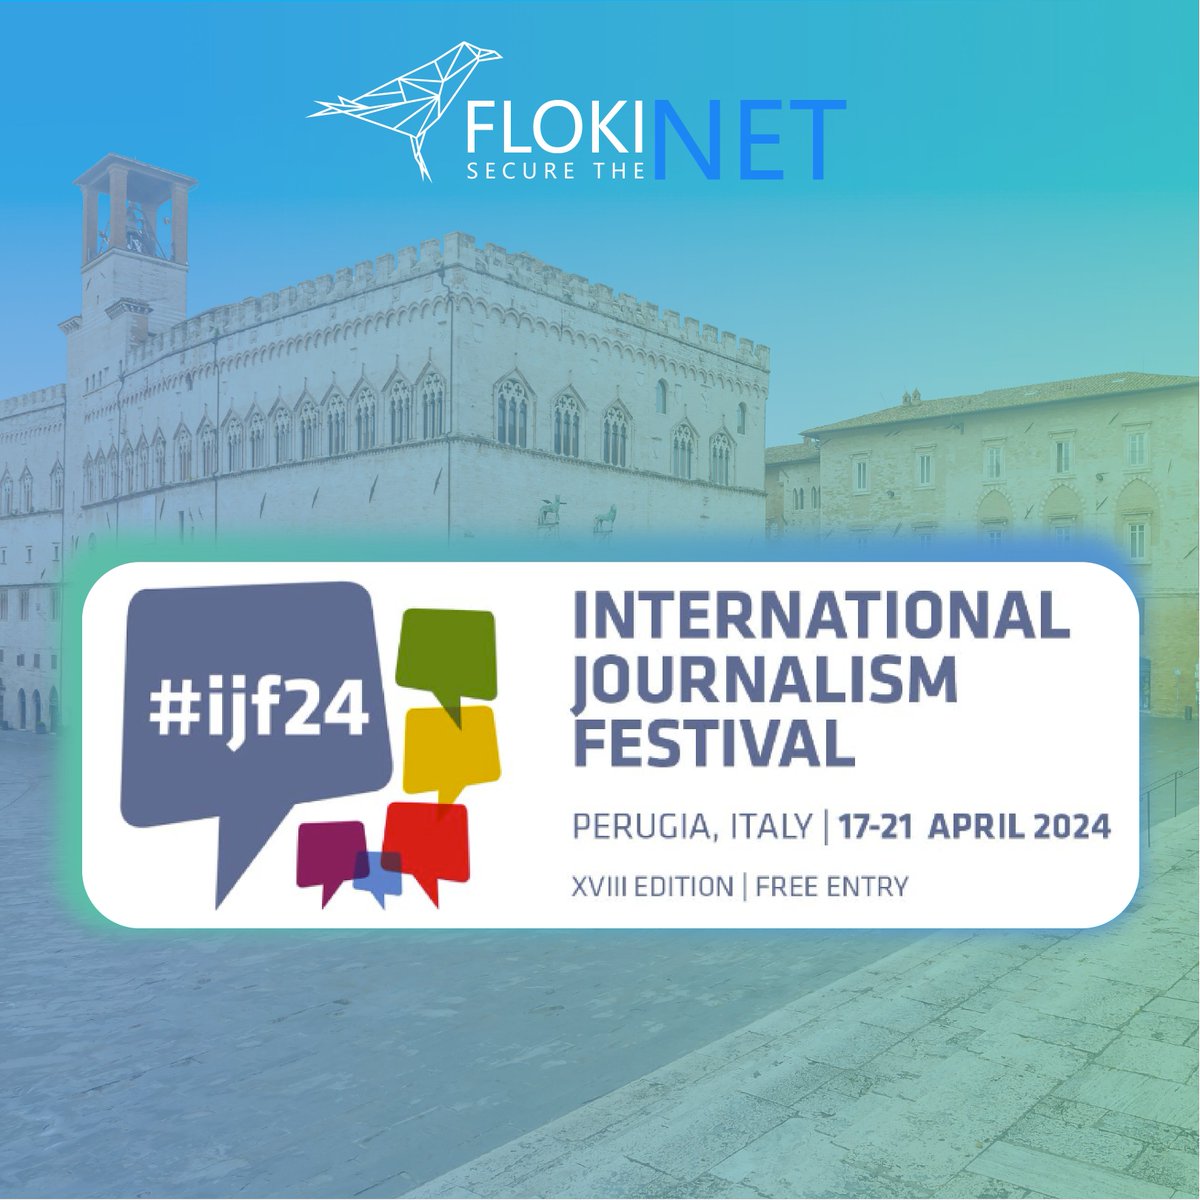 Tomorrow, we'll be at the International Journalism Festival in Perugia, Italy! 🇮🇹 Looking forward to all the engaging panel discussions and networking opportunities. Let us know if you're around! #ijf24 @journalismfest